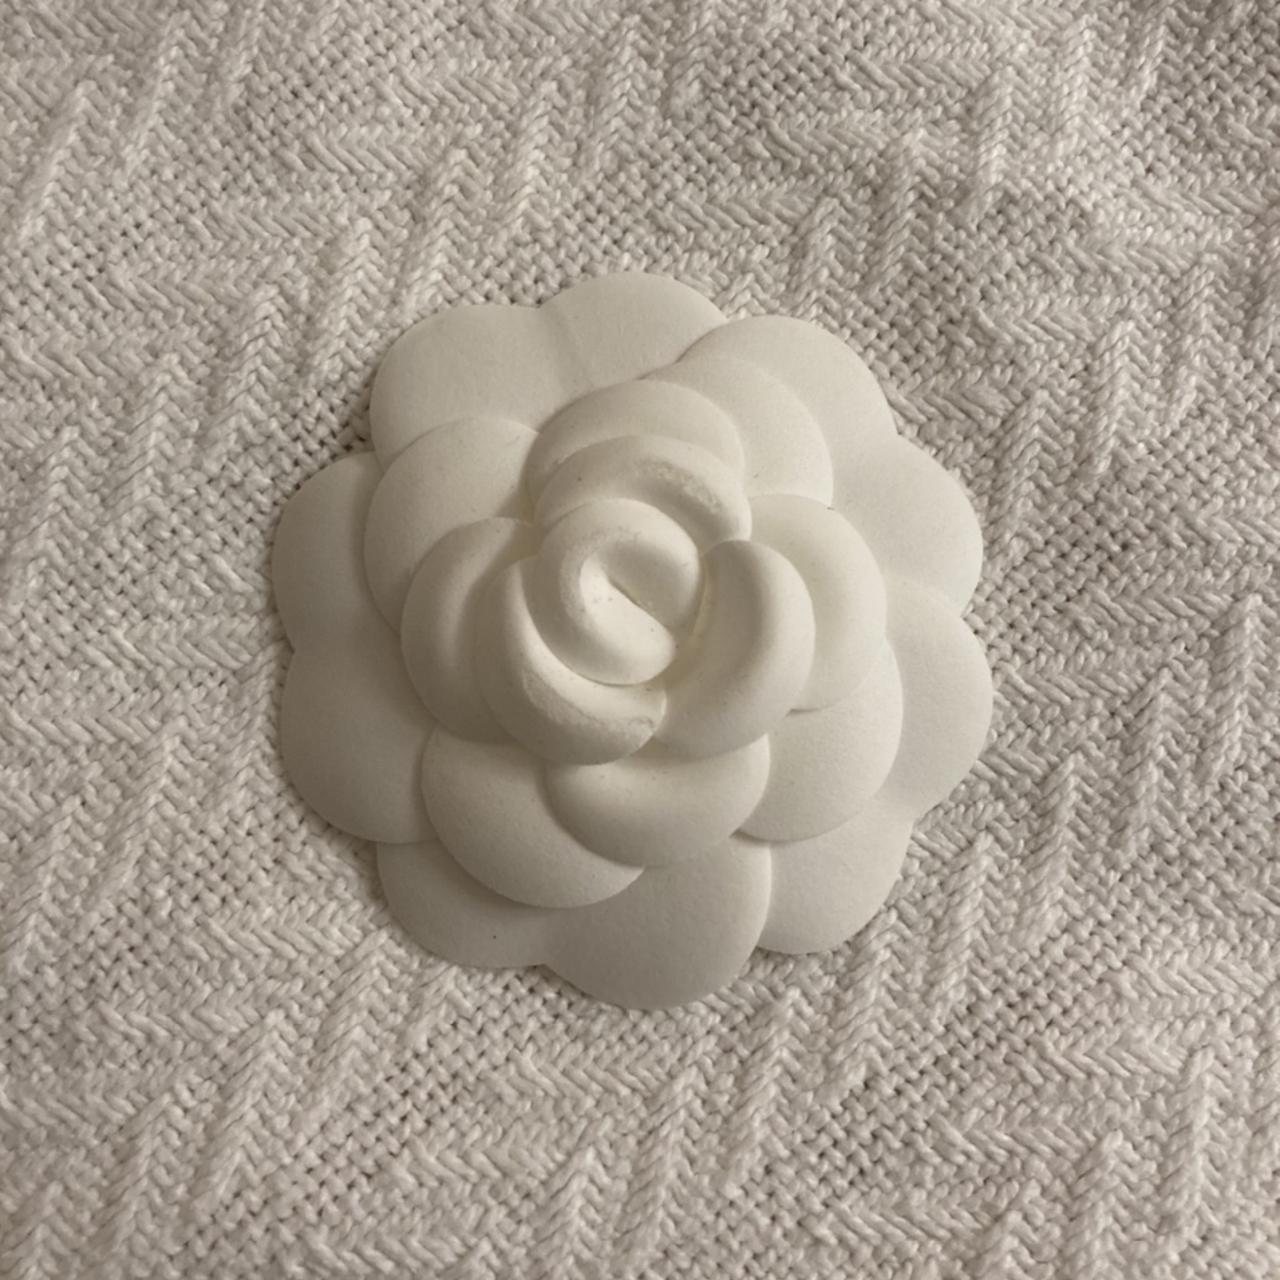 Chanel white camellia flower , brand new, from the